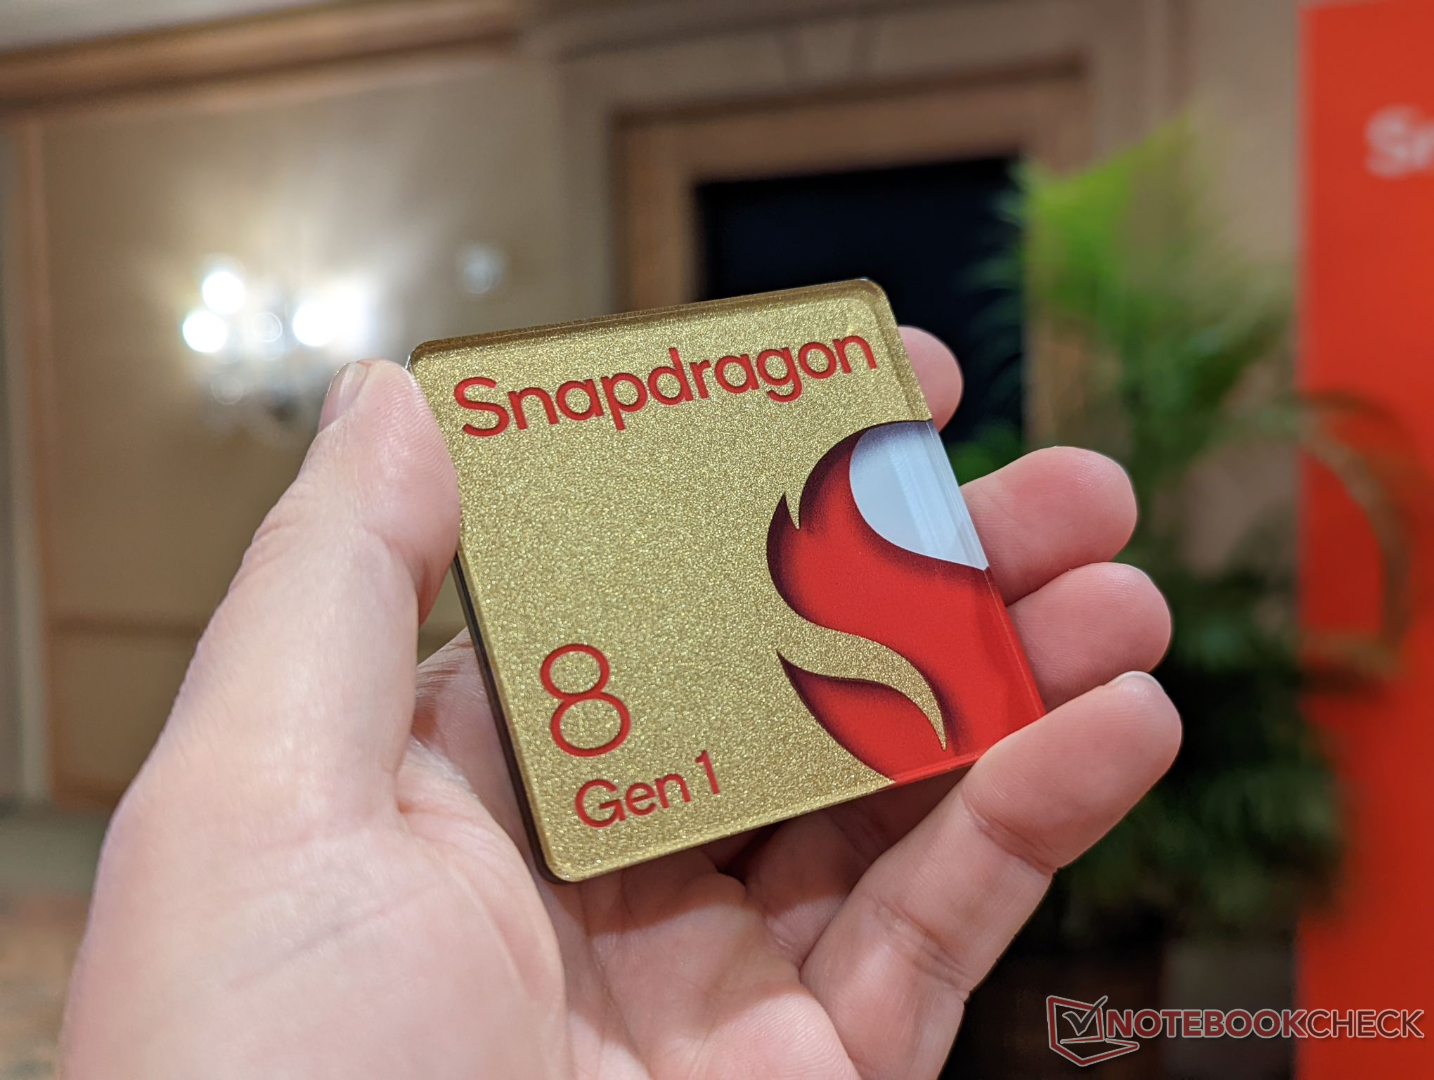 Qualcomm Snapdragon 8 Gen 3 could trade blows with Apple Silicon thanks to massive single and multi-core gains; Snapdragon 8 Gen 4 rumoured to launch with Nuvia cores thumbnail